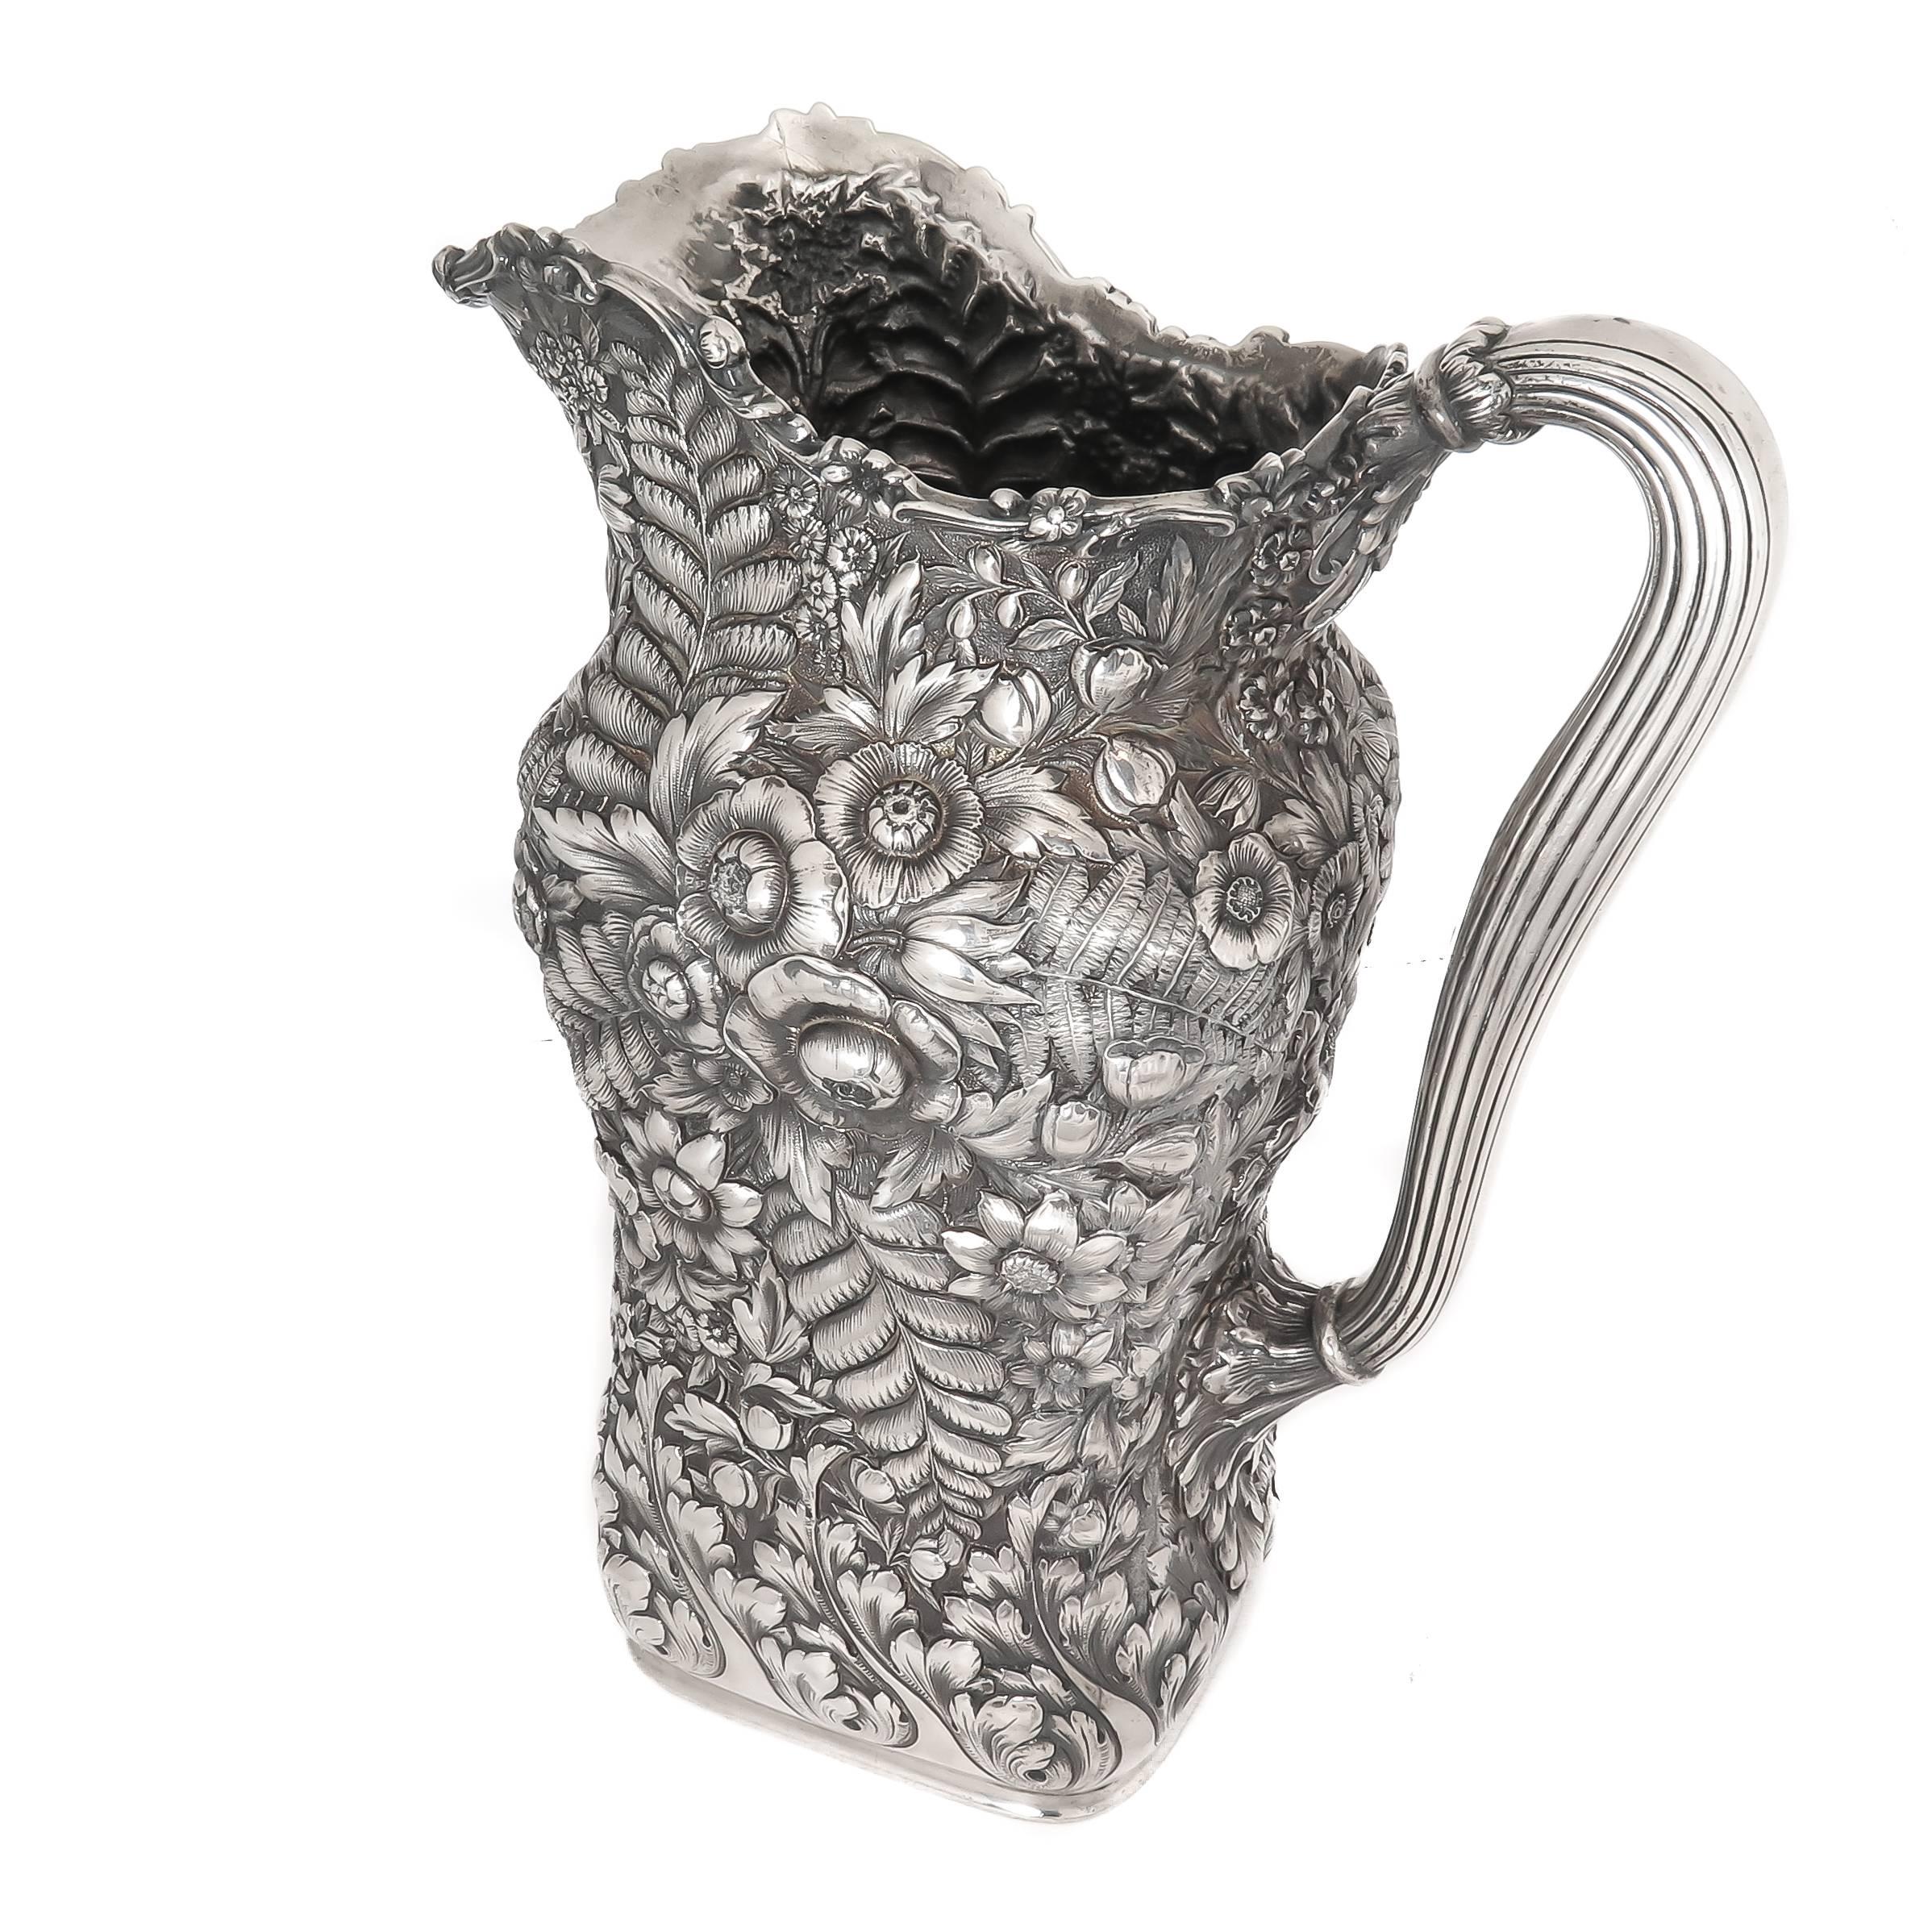 Aesthetic Movement Tiffany & Co. Large Aesthetic Period Heavy Repousse Silver Pitcher